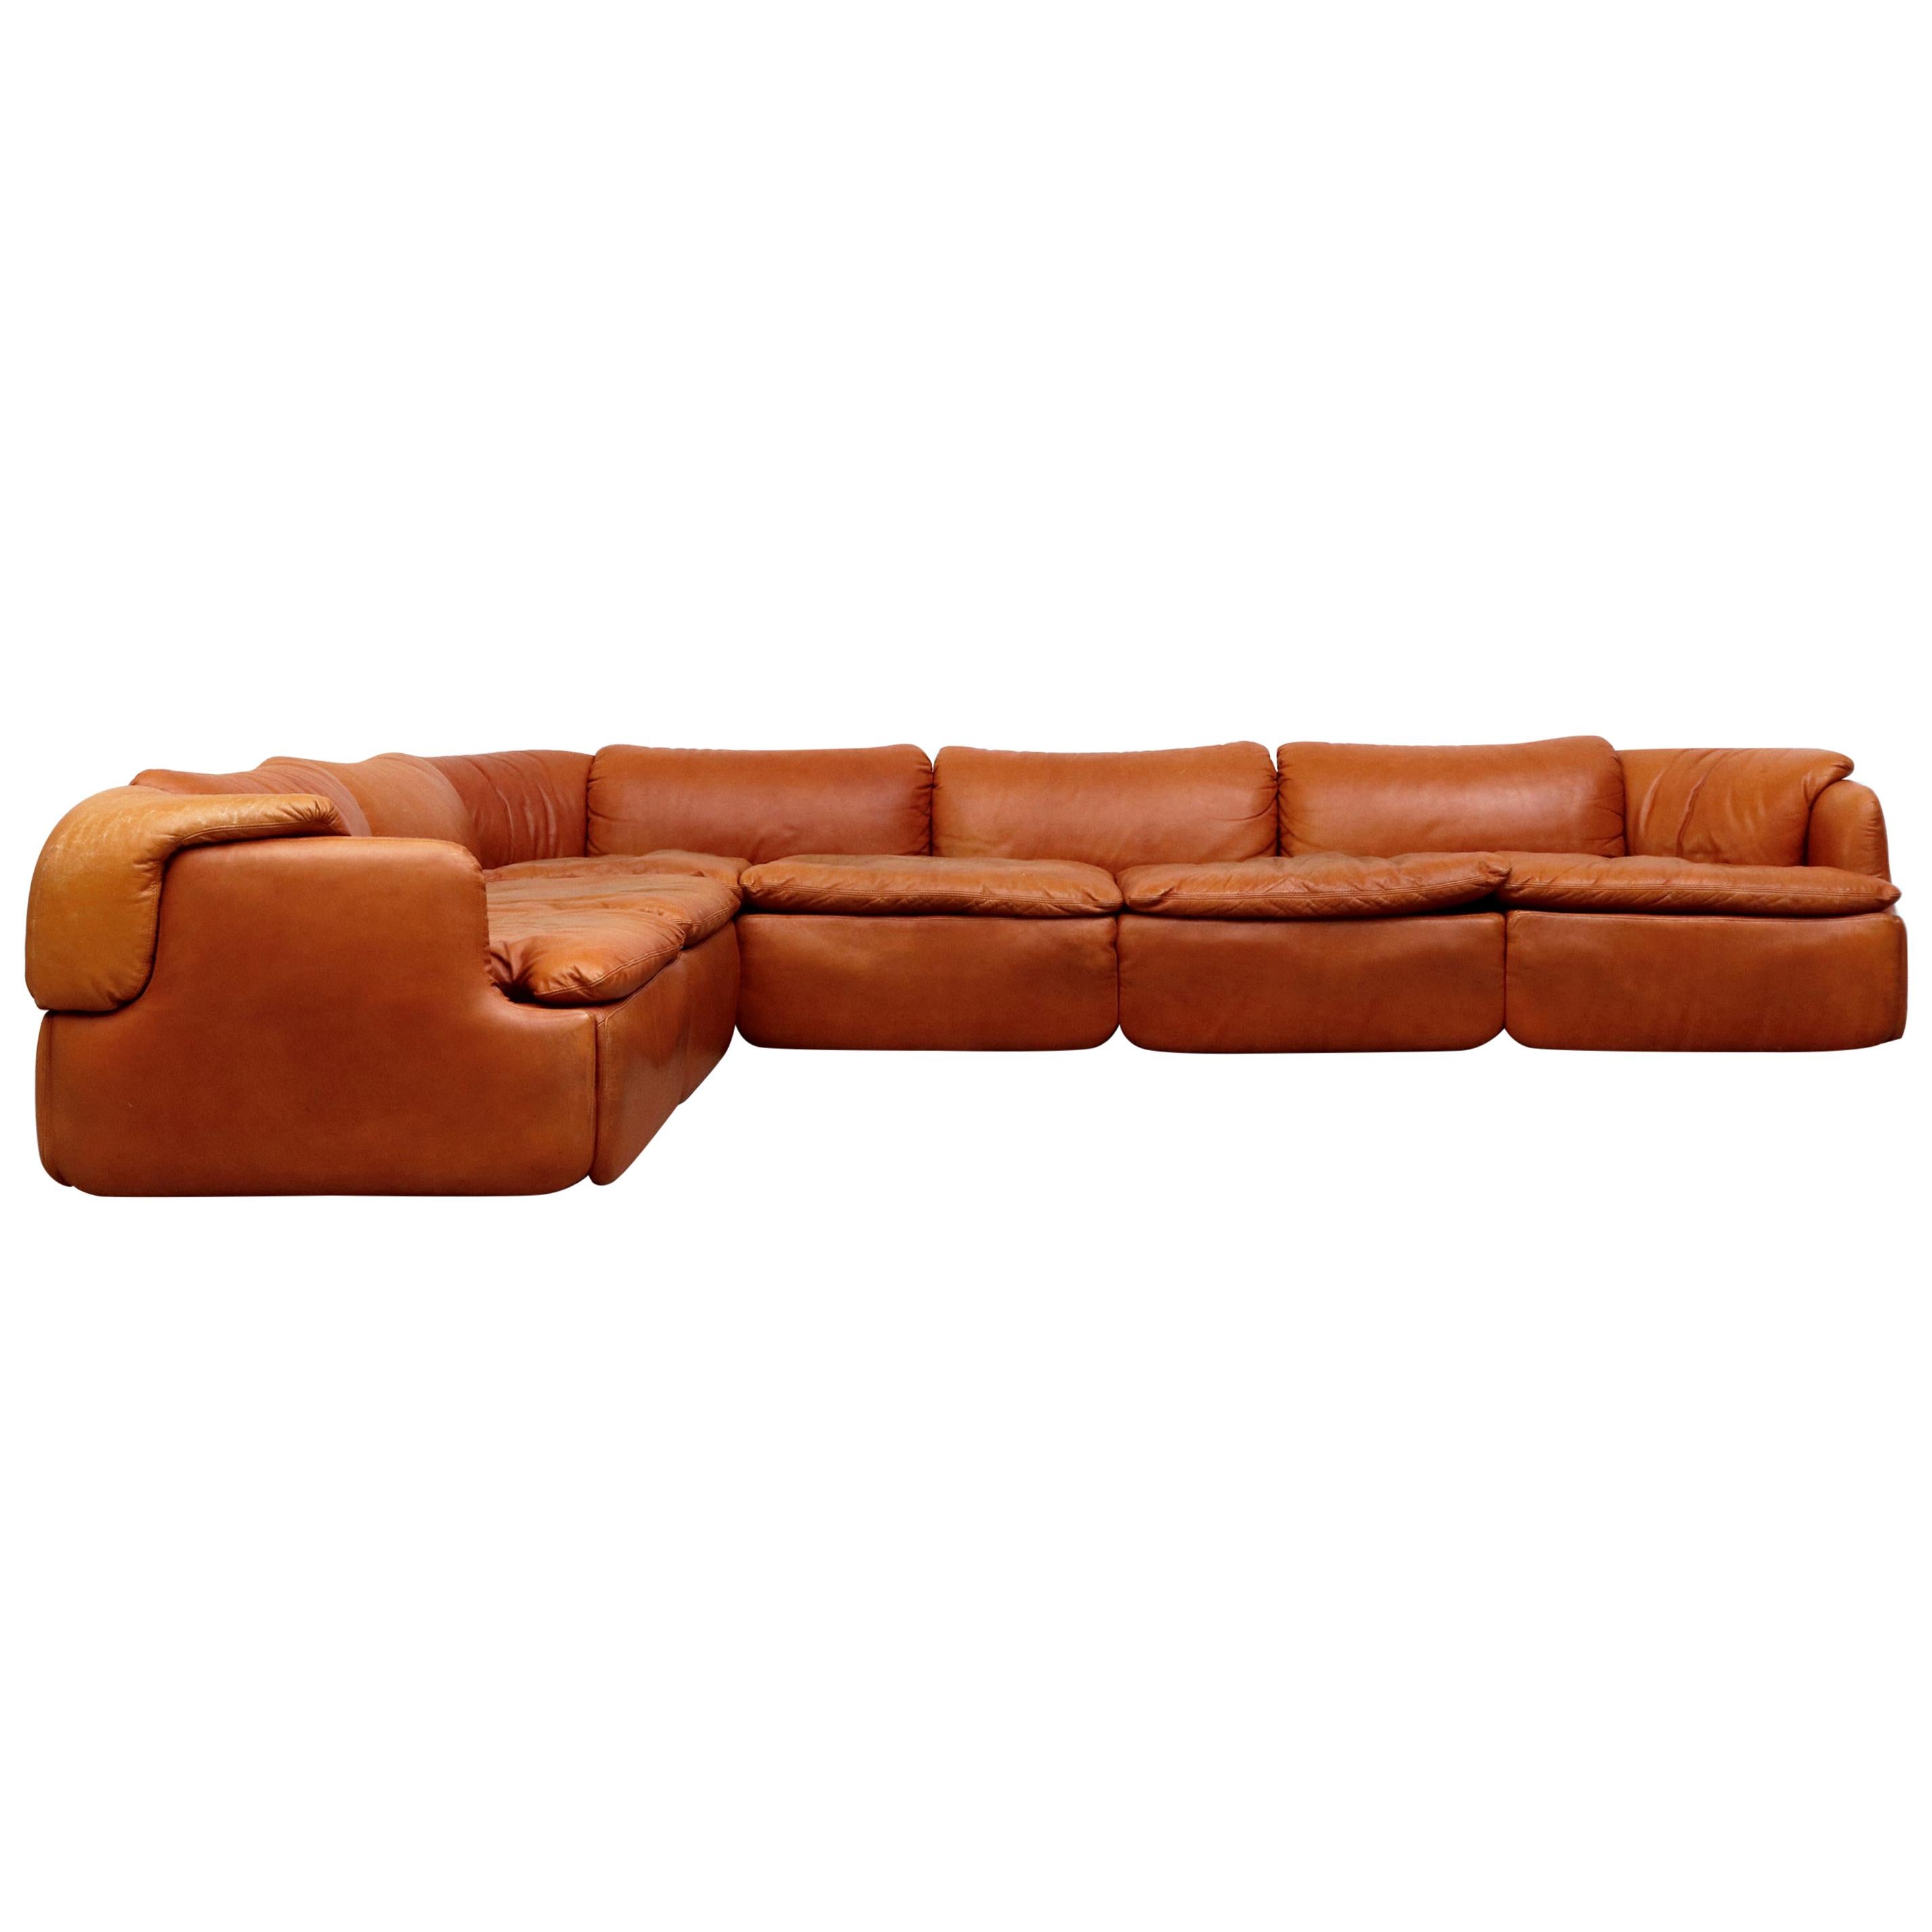 Saporiti 'Confidential' Leather Sectional Sofa by Alberto Rosselli